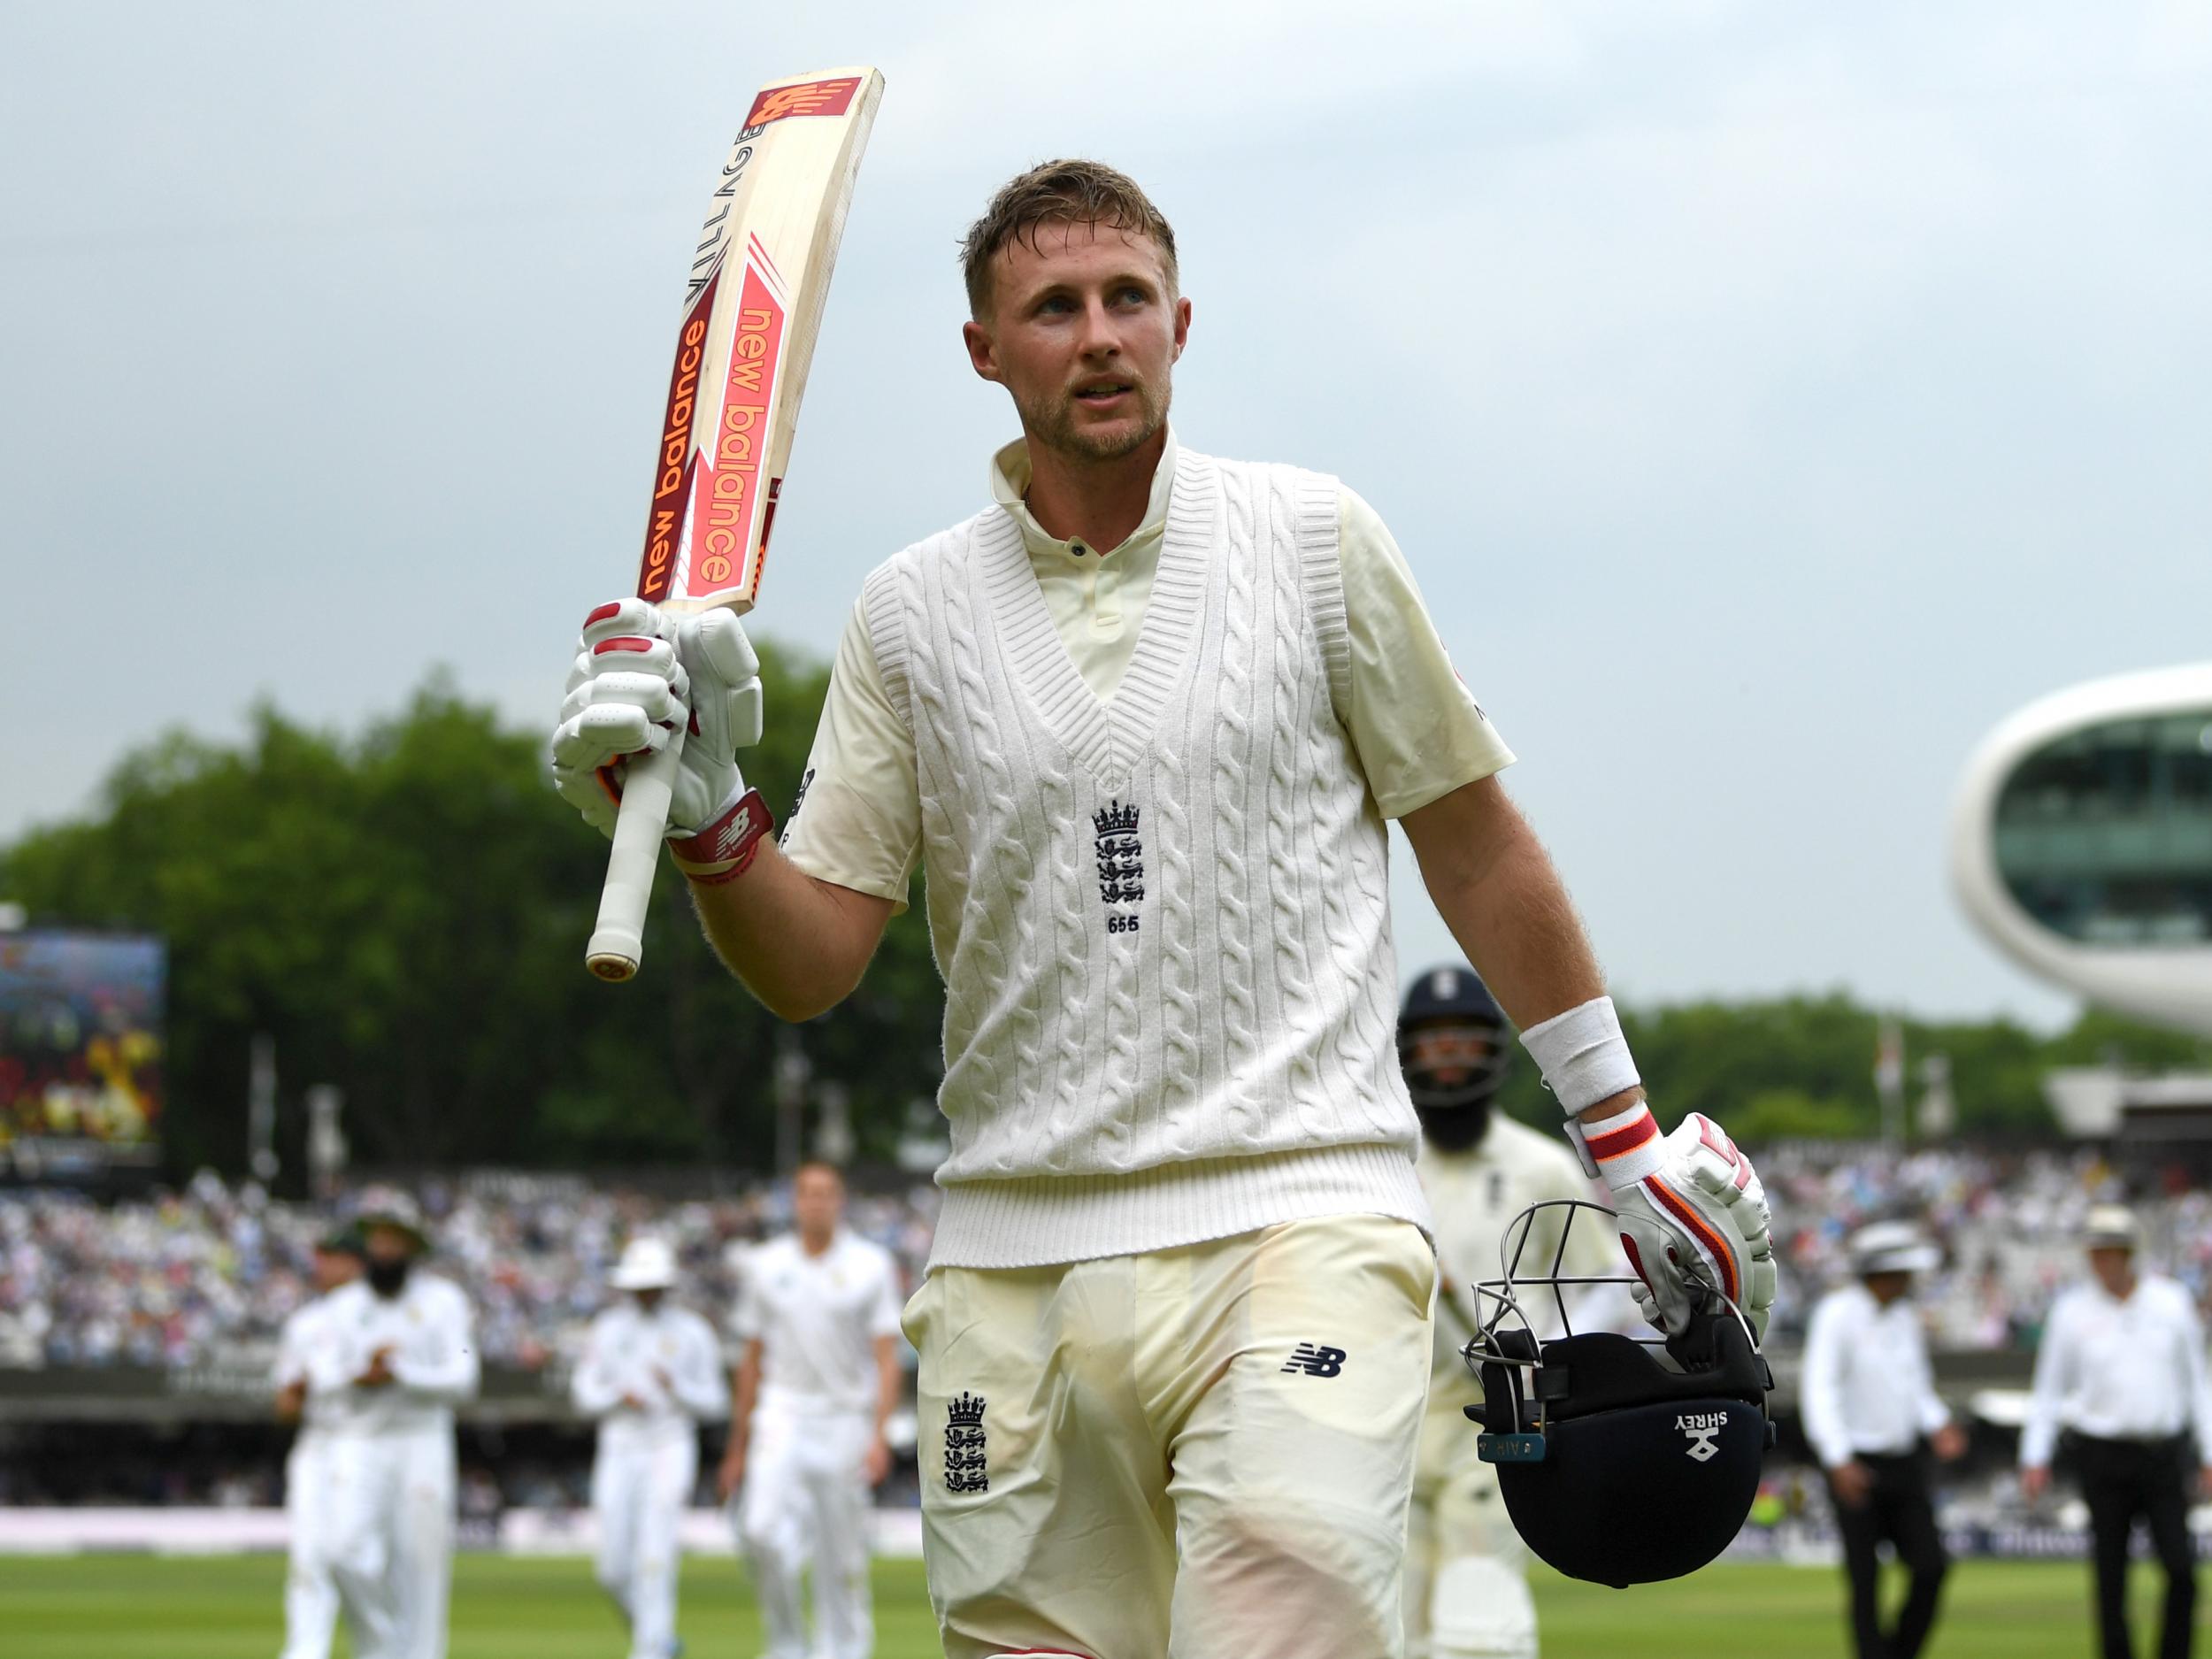 Root had a dream start to life as England's Test captain